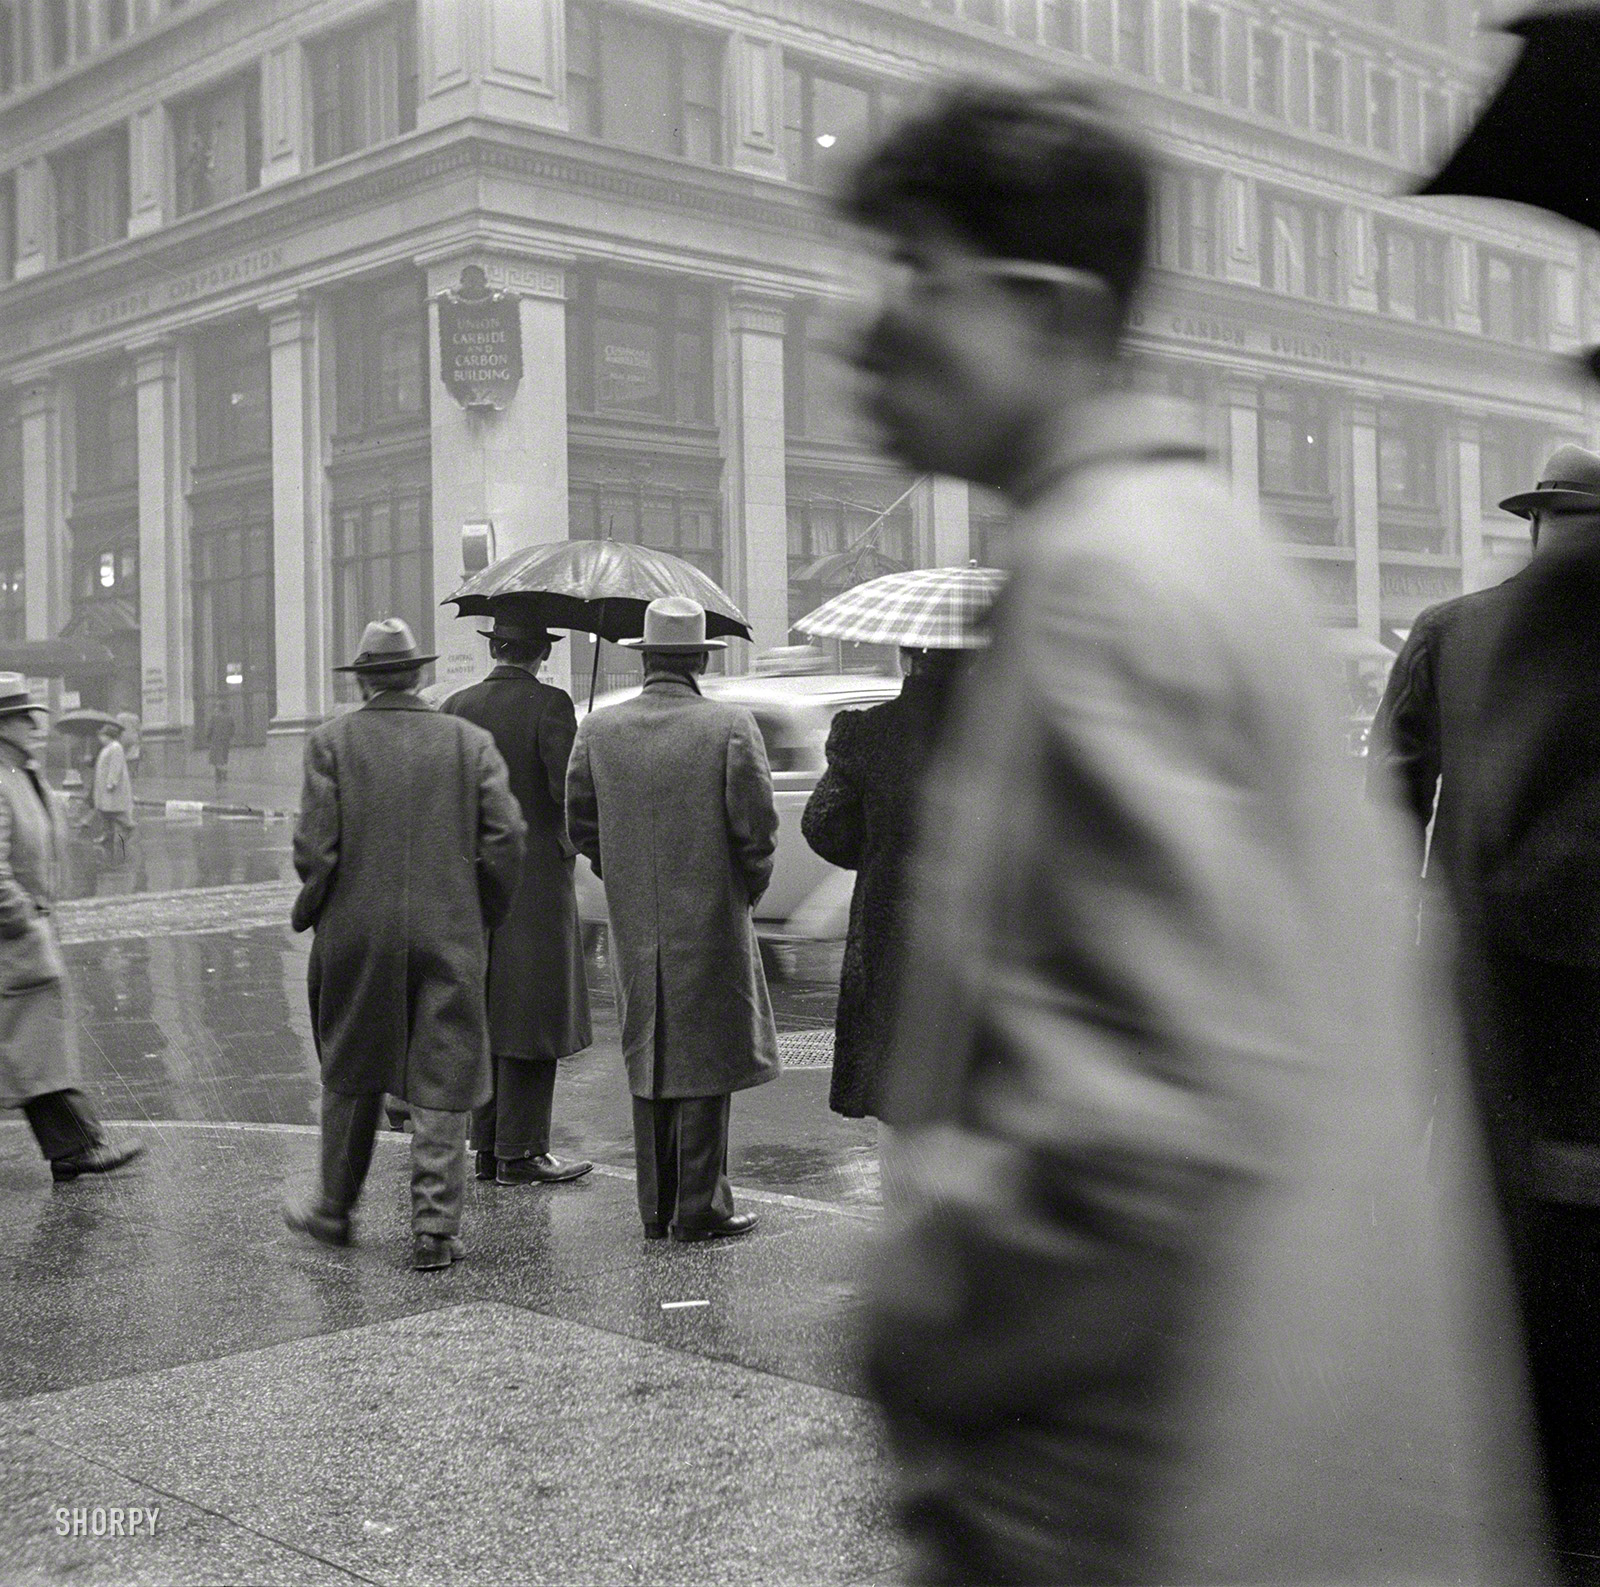 March 1943. "New York, New York. Madison Avenue on a rainy day." Photo by John Vachon for the Office of War Information. View full size.